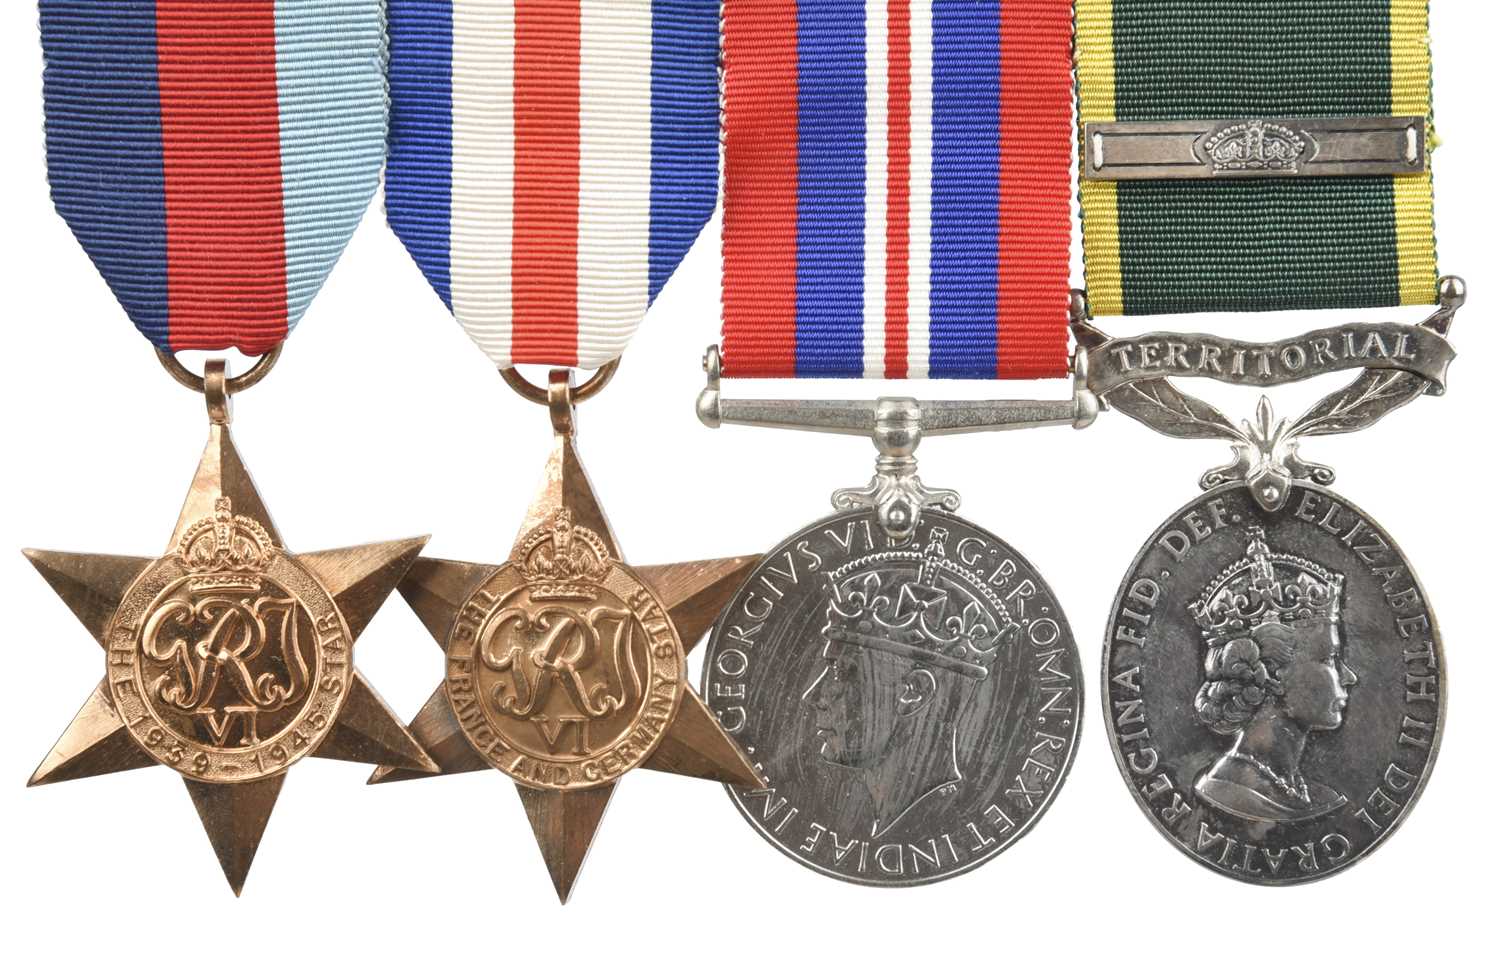 The very interesting and scarce Second World War P.O.W. group of four medals to Lieutenant Ernest